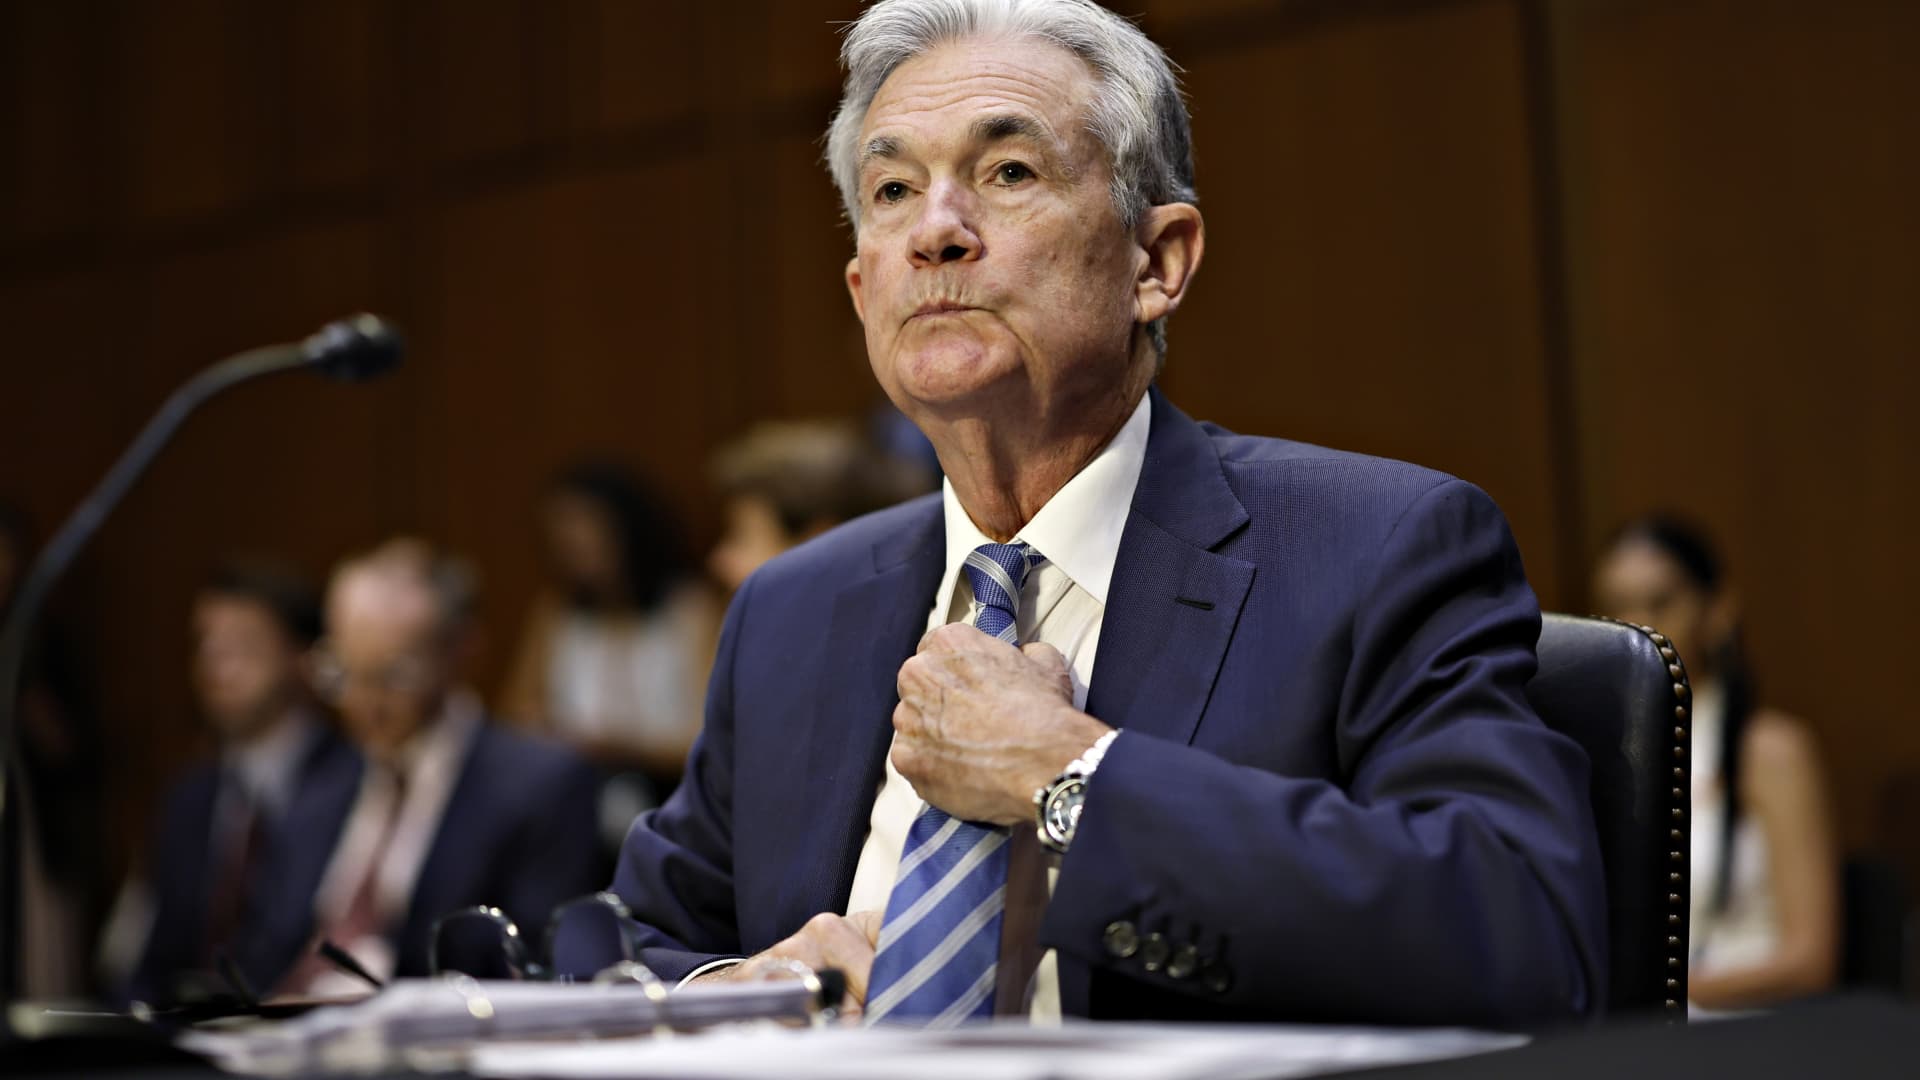 Powell tells Congress the Fed is 'strongly committed' to bringing down inflation - CNBC Finance (Picture 1)